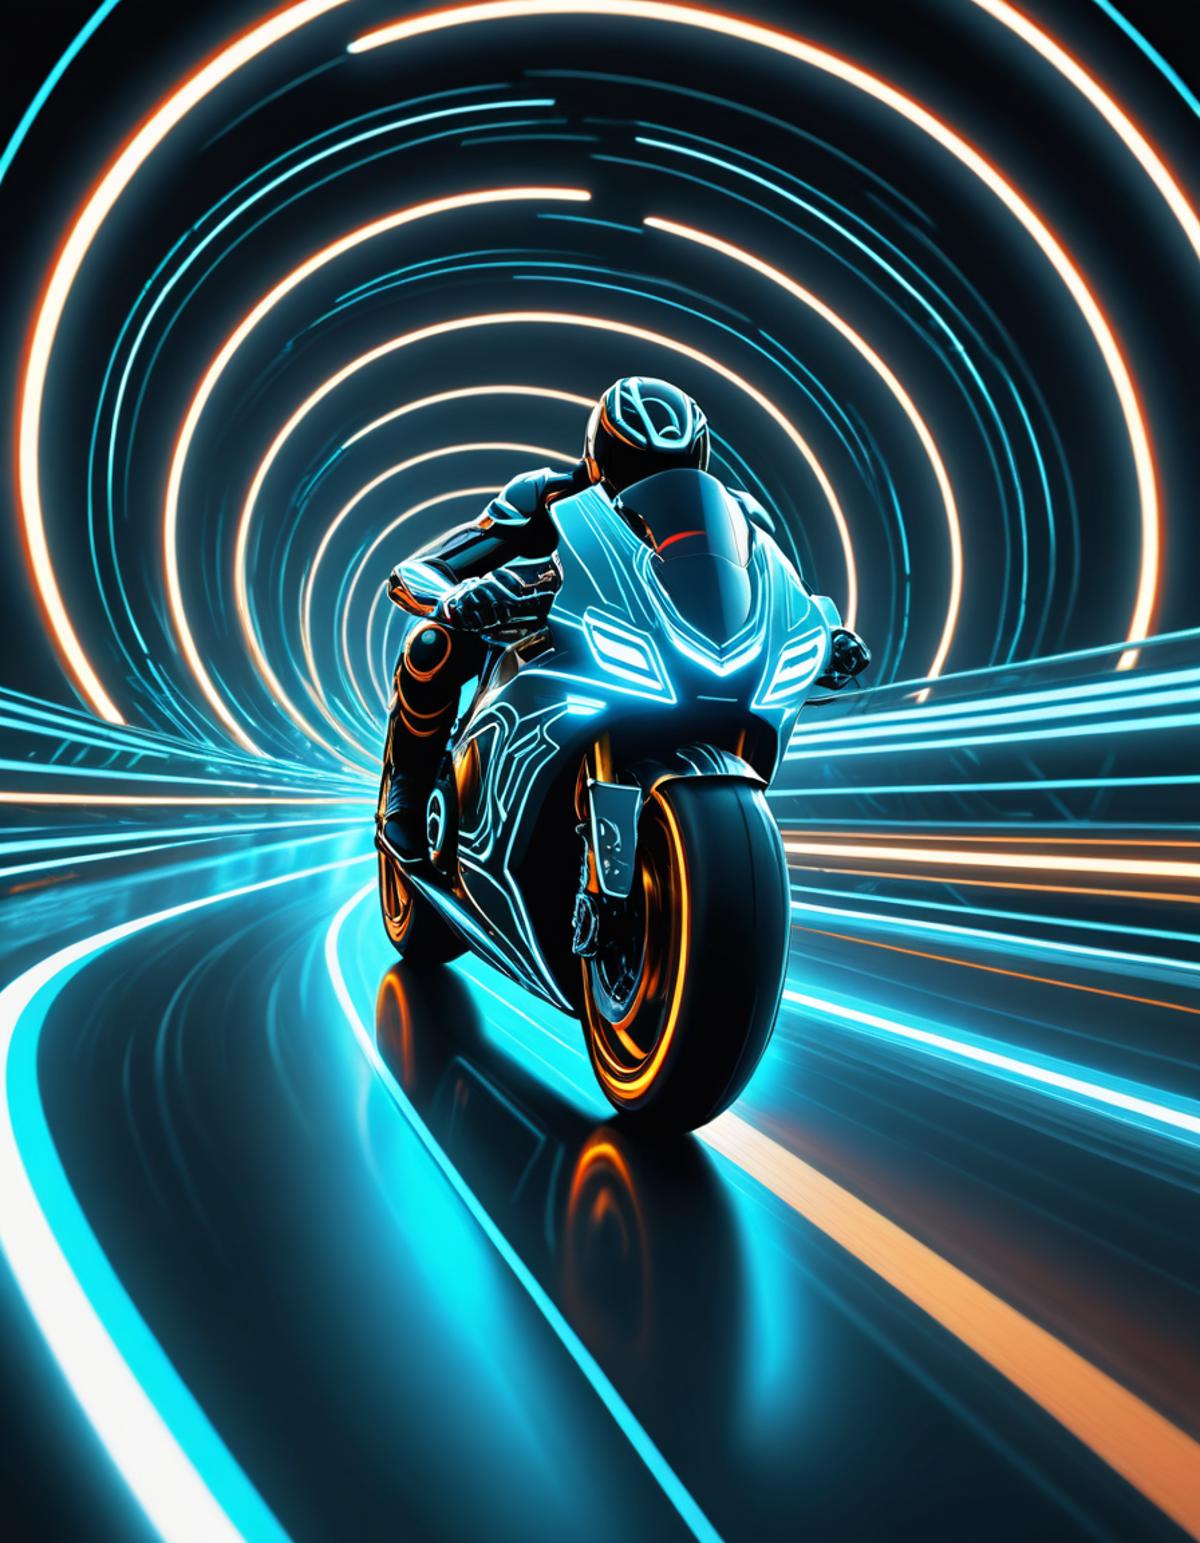 A motorcycle rider in a futuristic setting with a blue tunnel and a bright background.